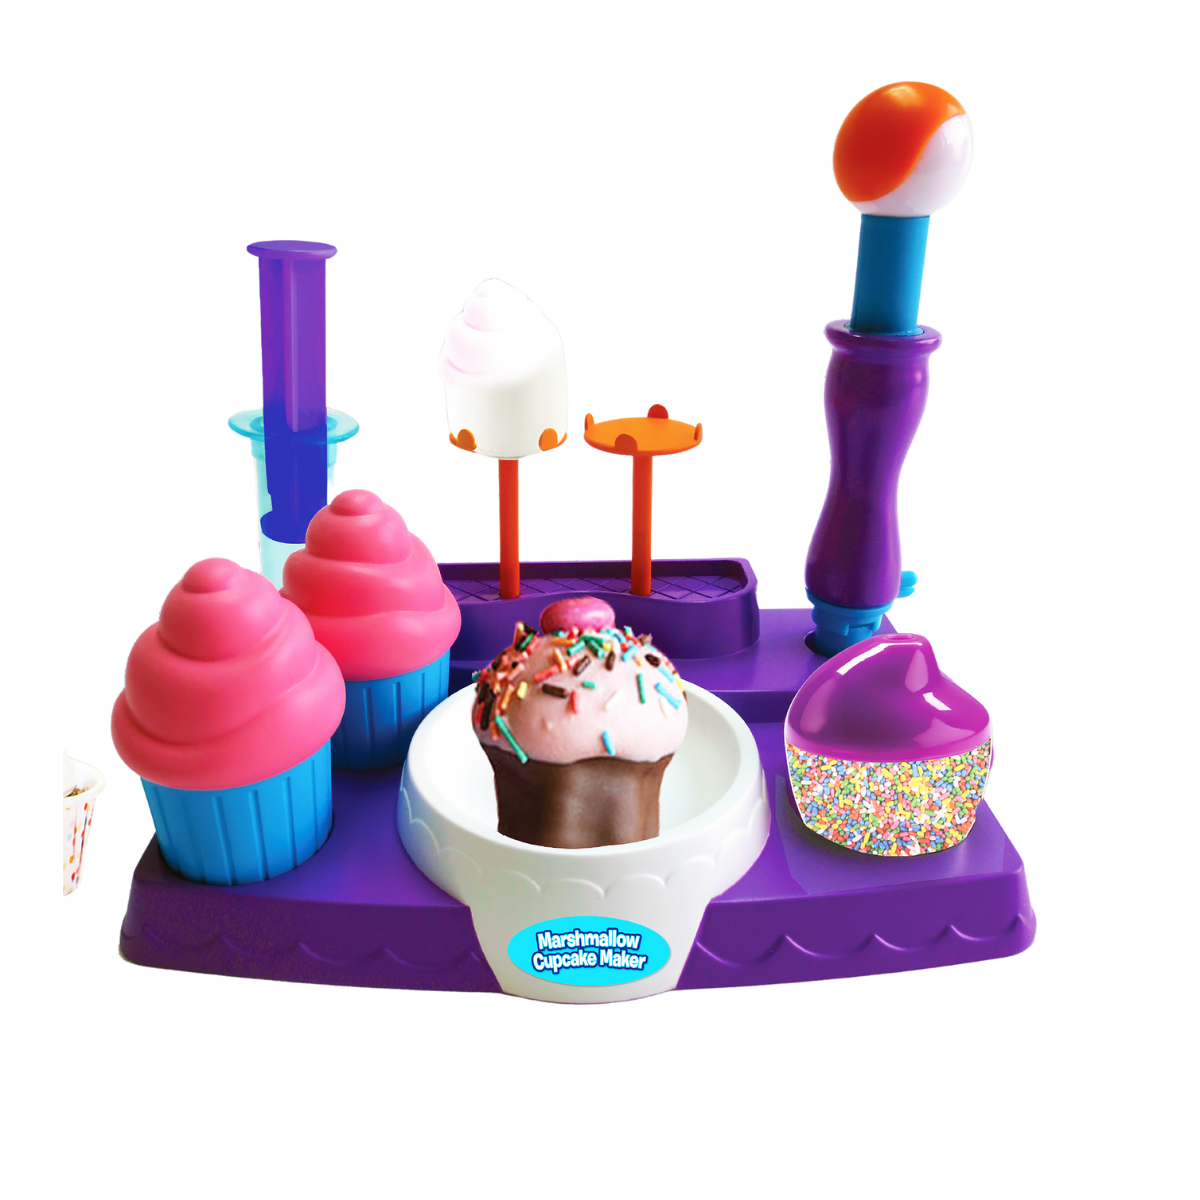 Marshmallow Cup Cake Maker